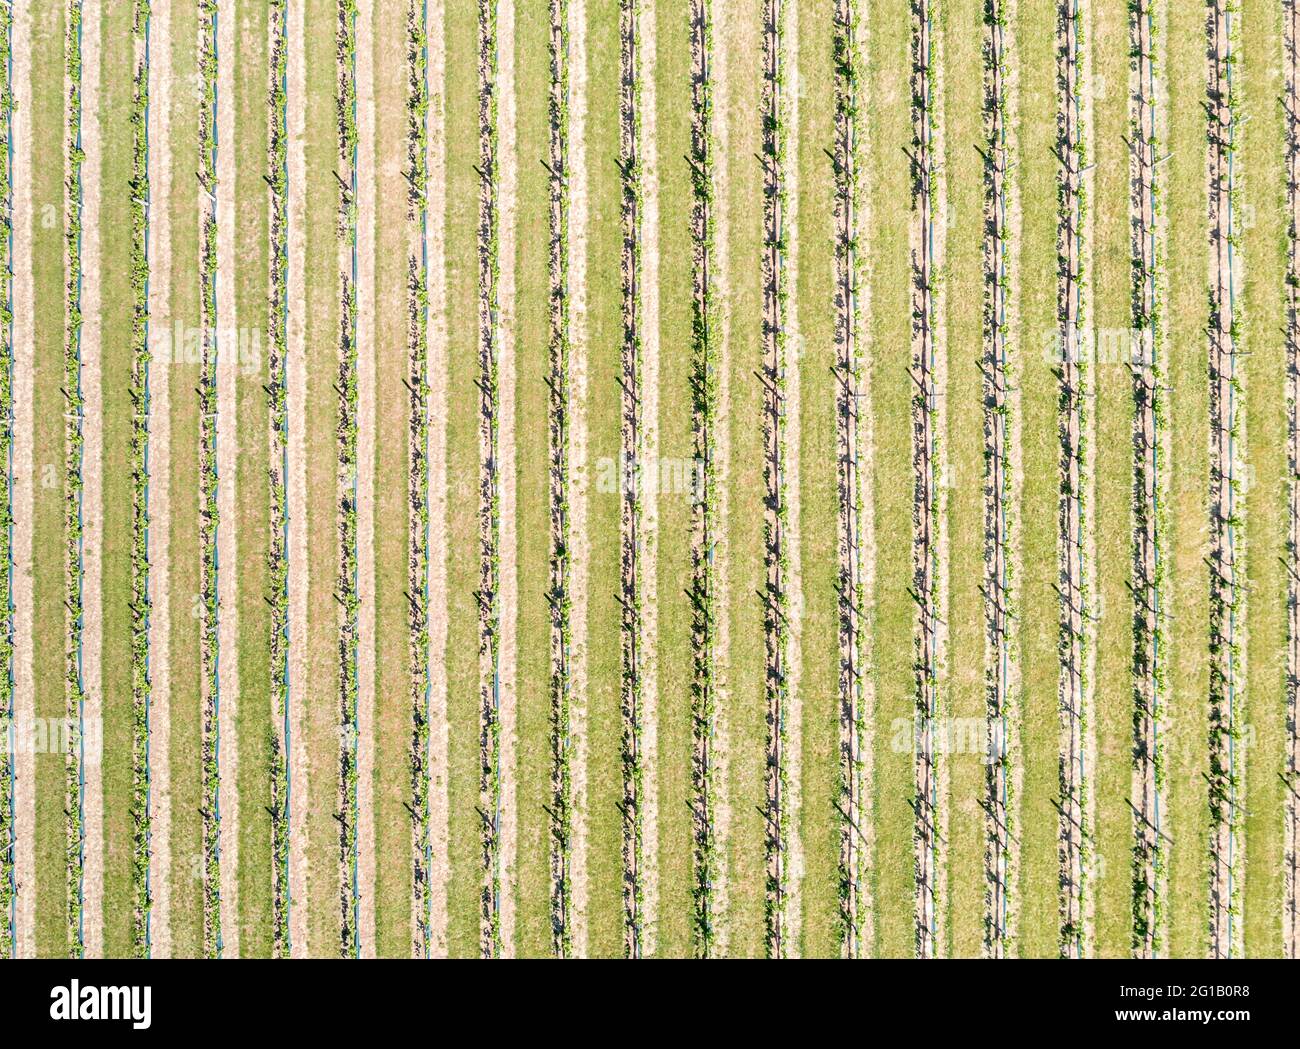 Aerial view of vineyards in Eastern Long Island, NY Stock Photo